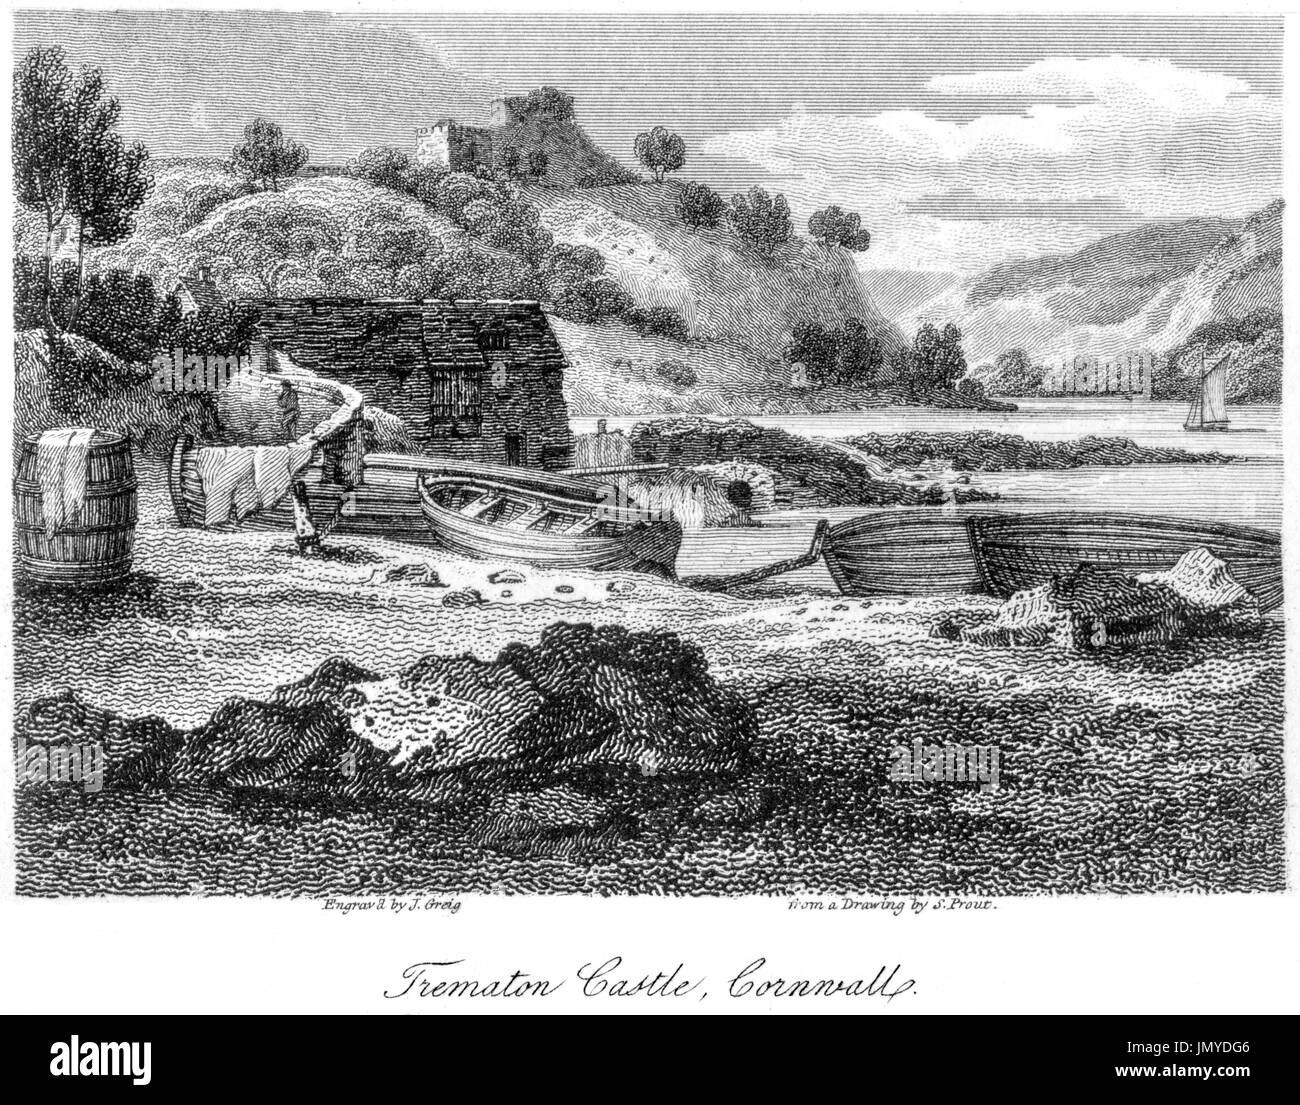 An engraving of Trematon Castle, Cornwall scanned at high resolution from a book printed in 1808.  Believed copyright free. Stock Photo